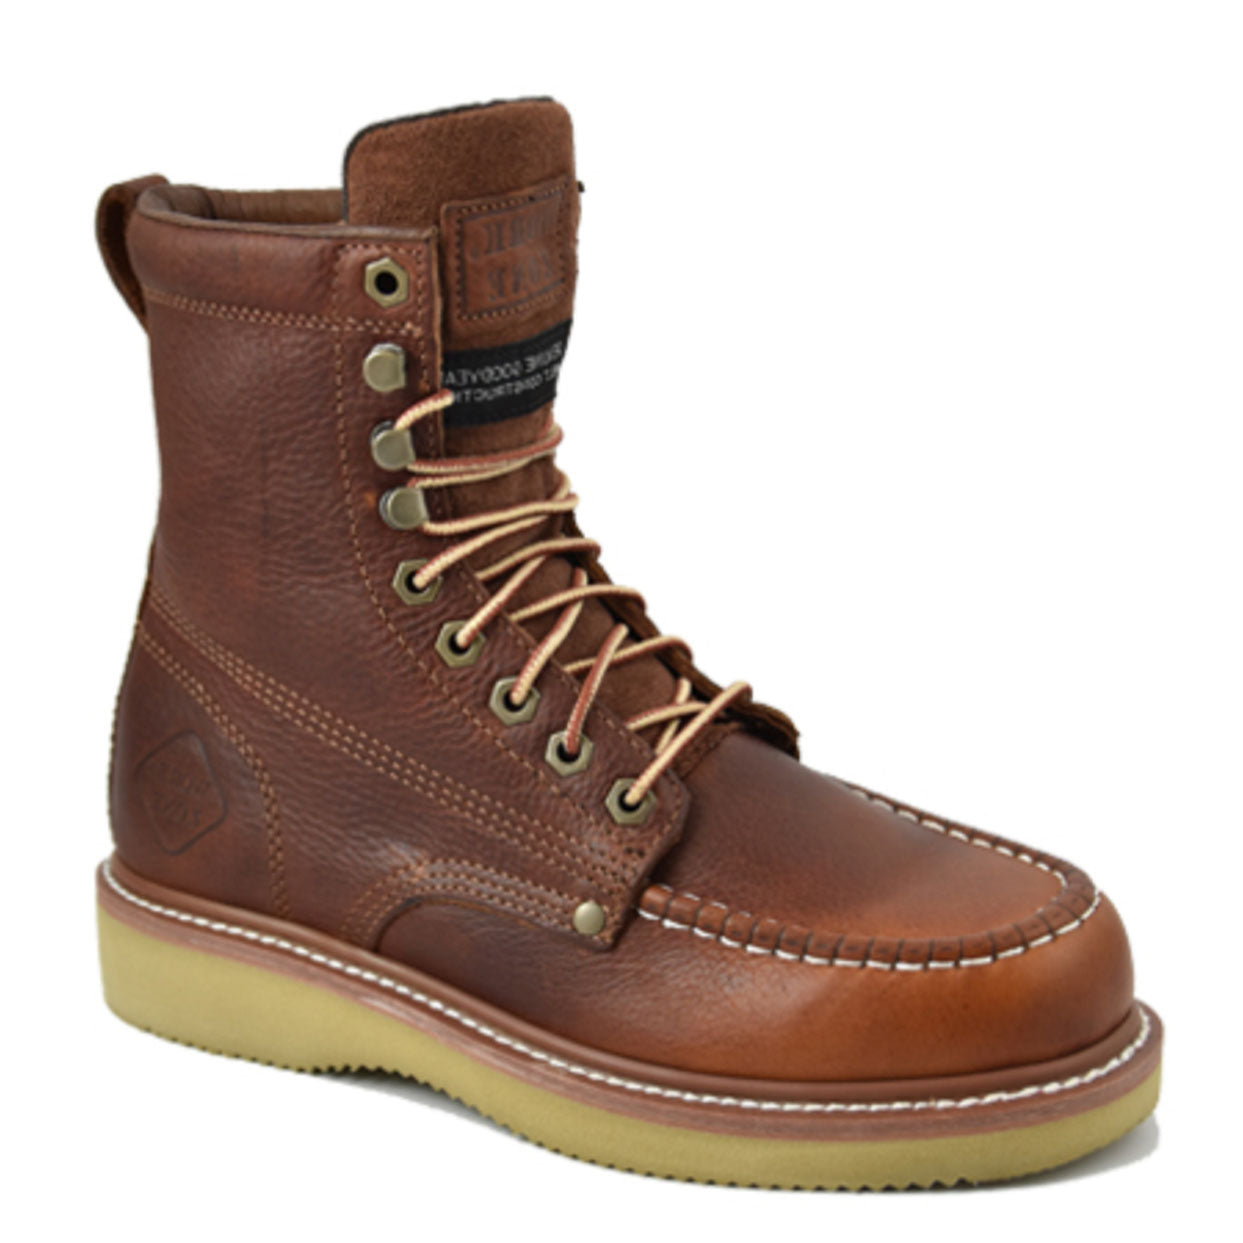 Work Zone - 834 8" Moc Toe Work Boots